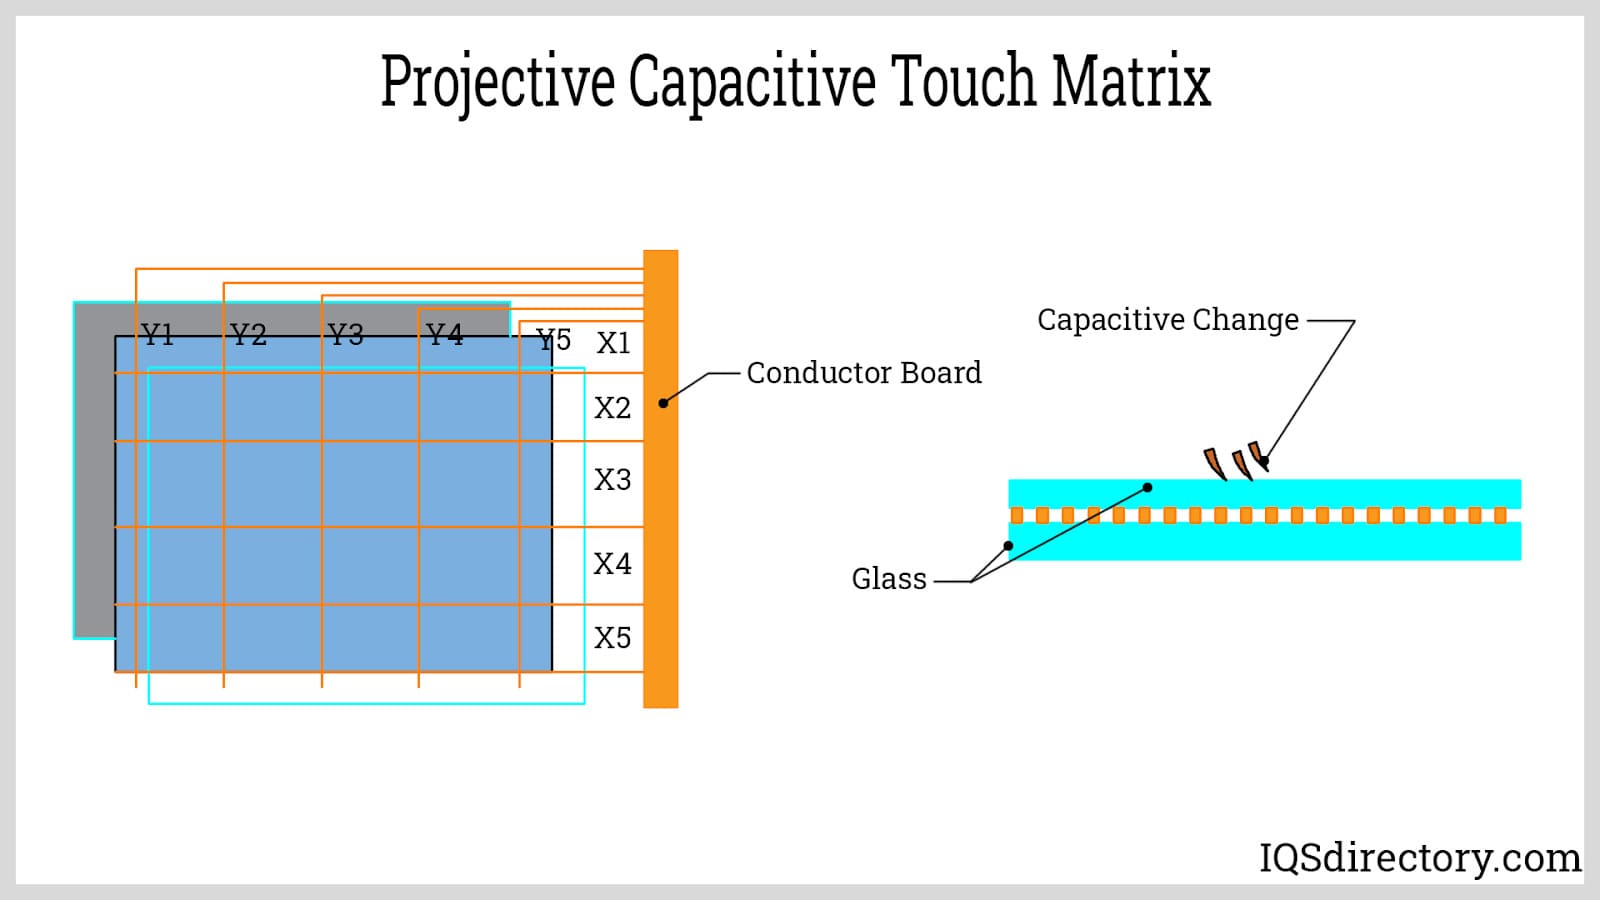 Projective Capacitive Touch Matrix